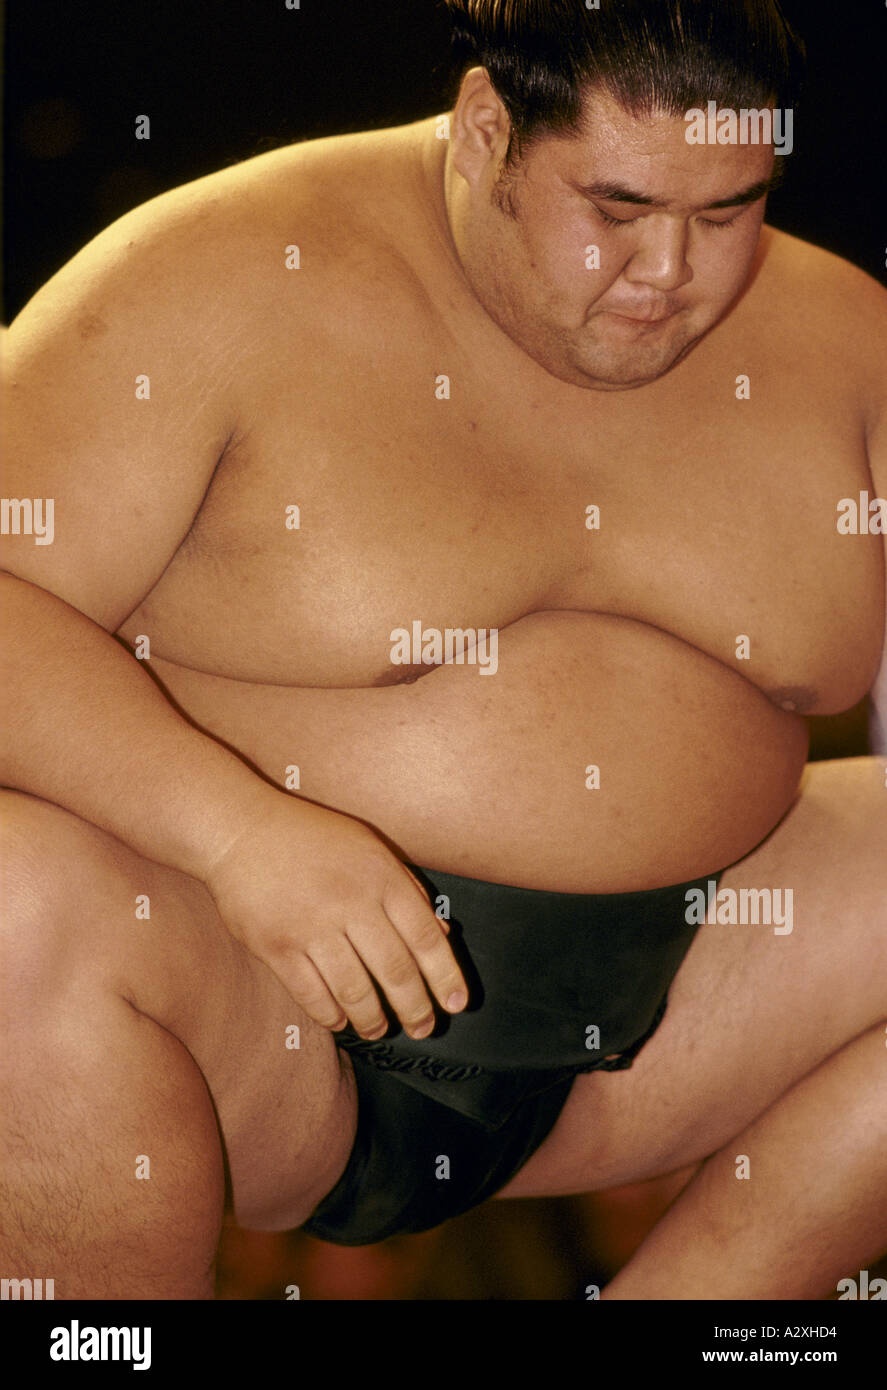 sumo wrestler wearing mawashi belt squatting down with bent knees preparing for bout Stock Photo